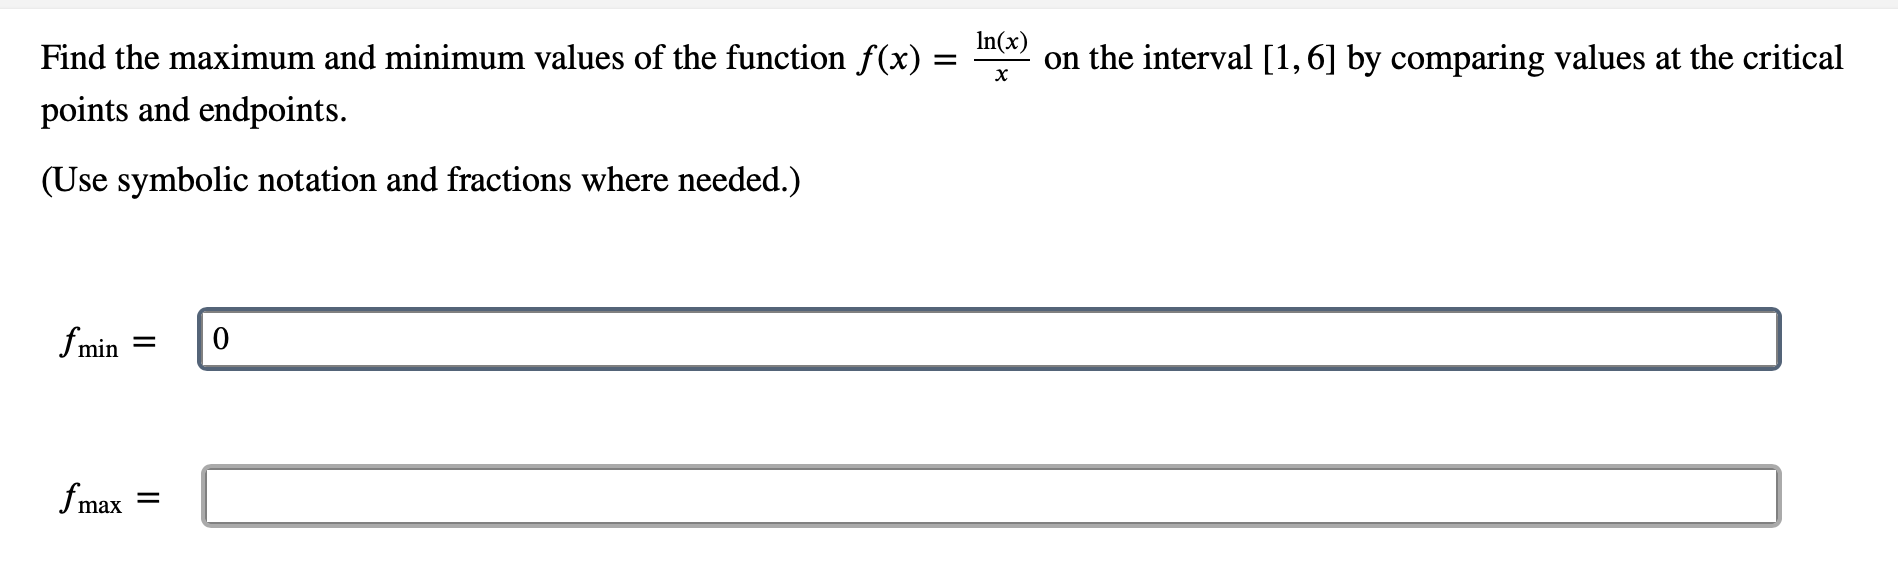 In(x)
on the interval [1,6] by comparing values at the critical
Find the maximum and minimum values of the function f(x) =
points and endpoints.
(Use symbolic notation and fractions where needed.)
fmin
fmax
